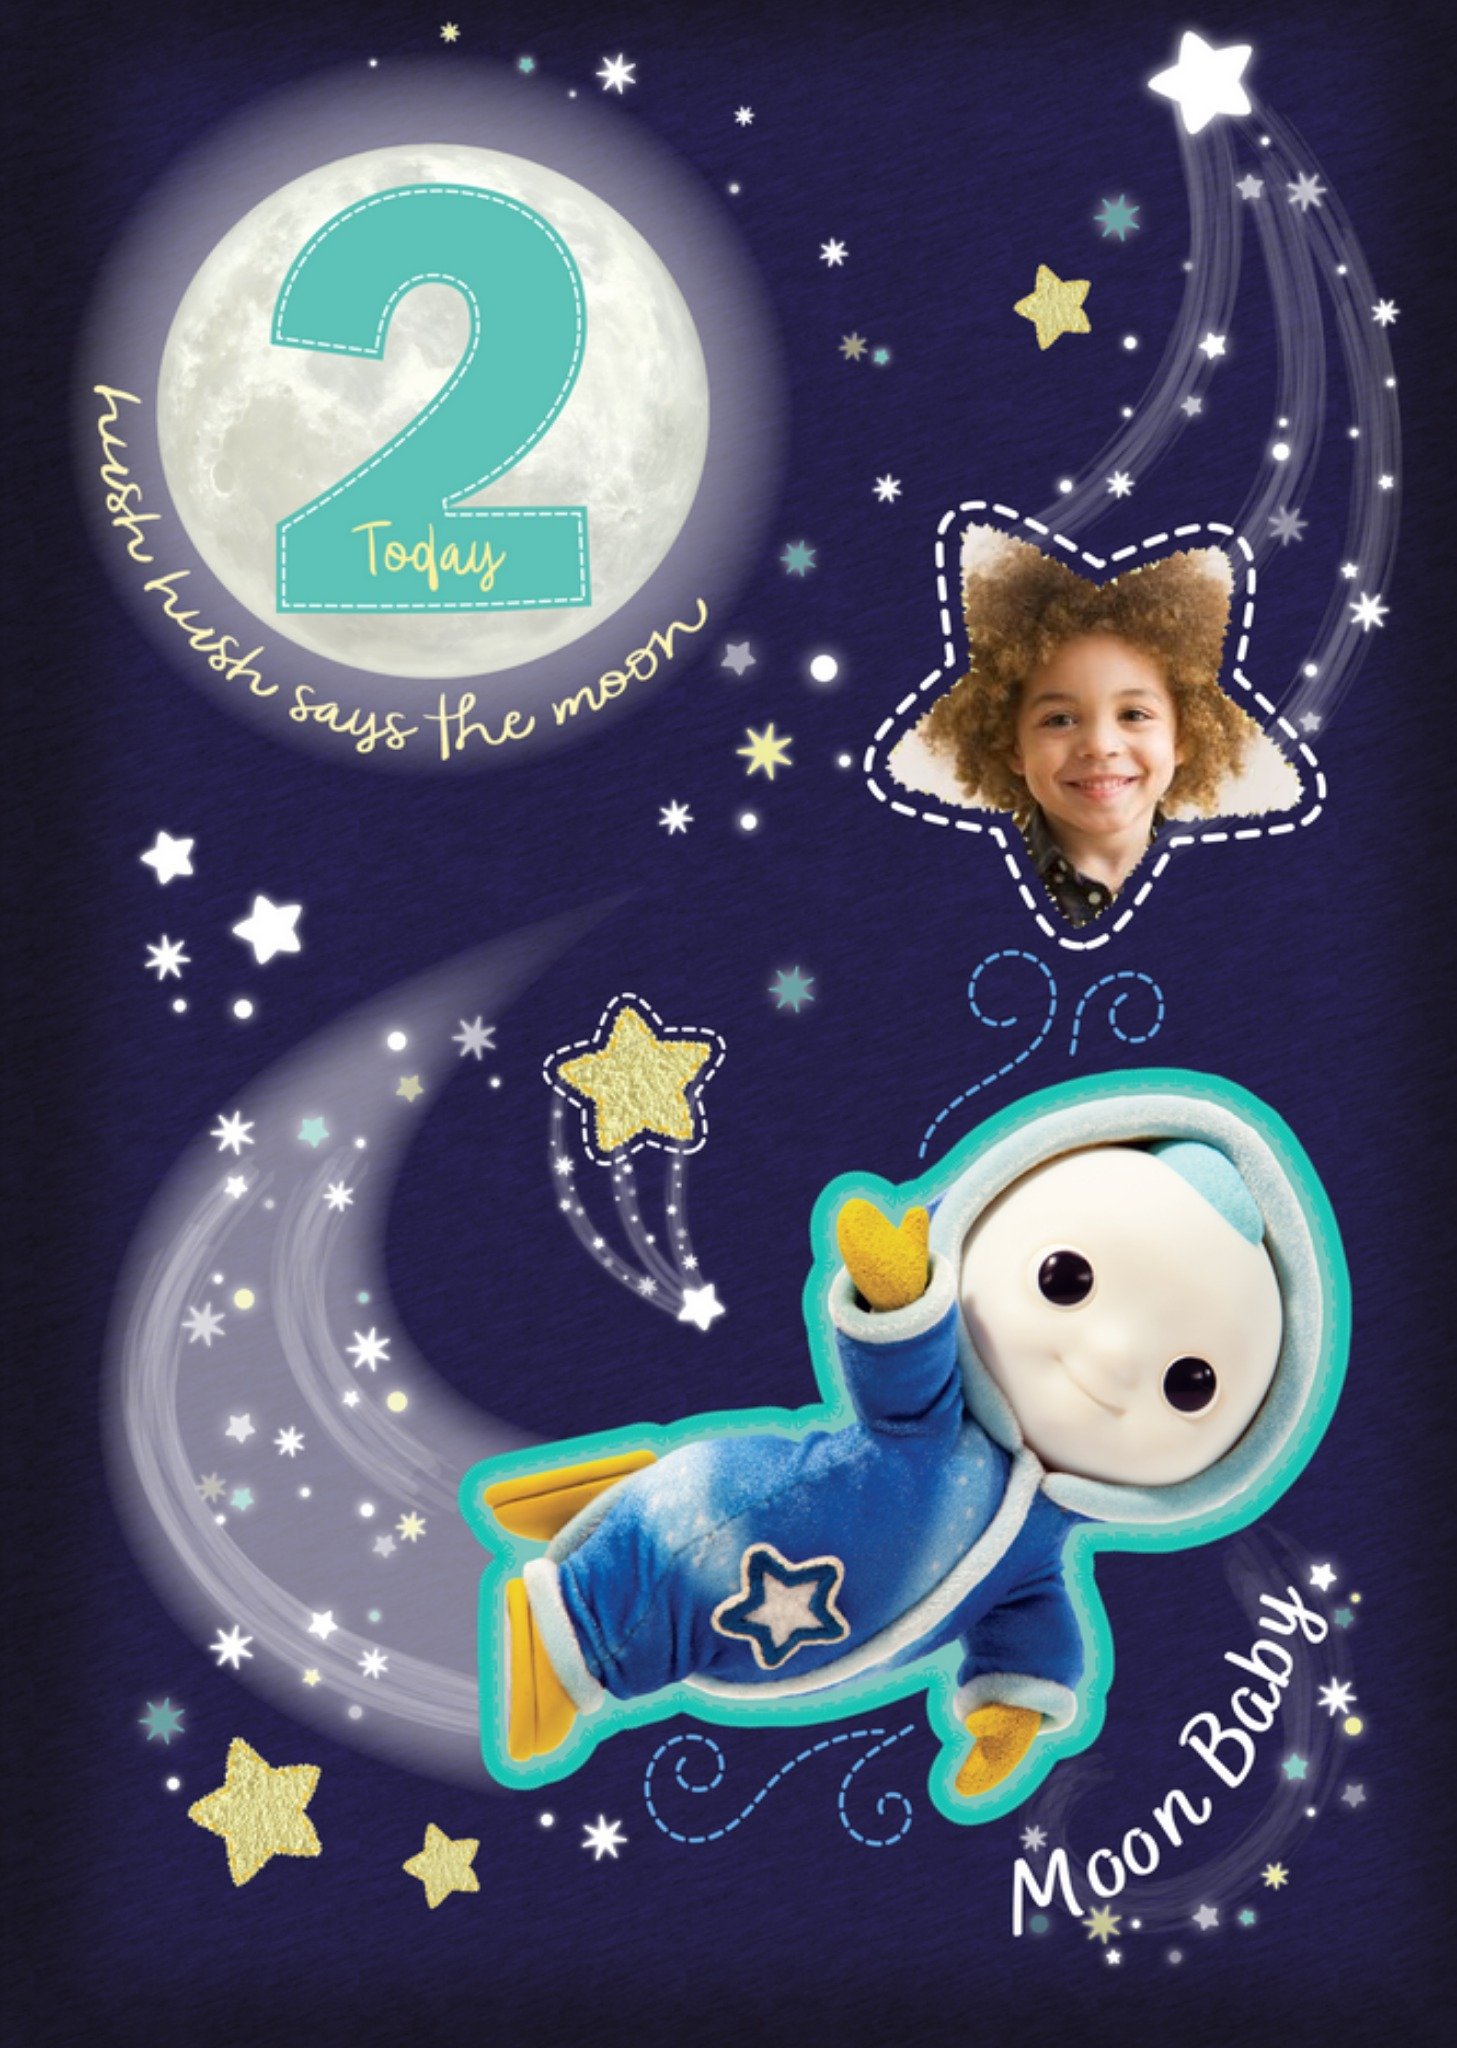 Other Moon And Me 2 Today Moon Baby Photo Upload Birthday Card, Large